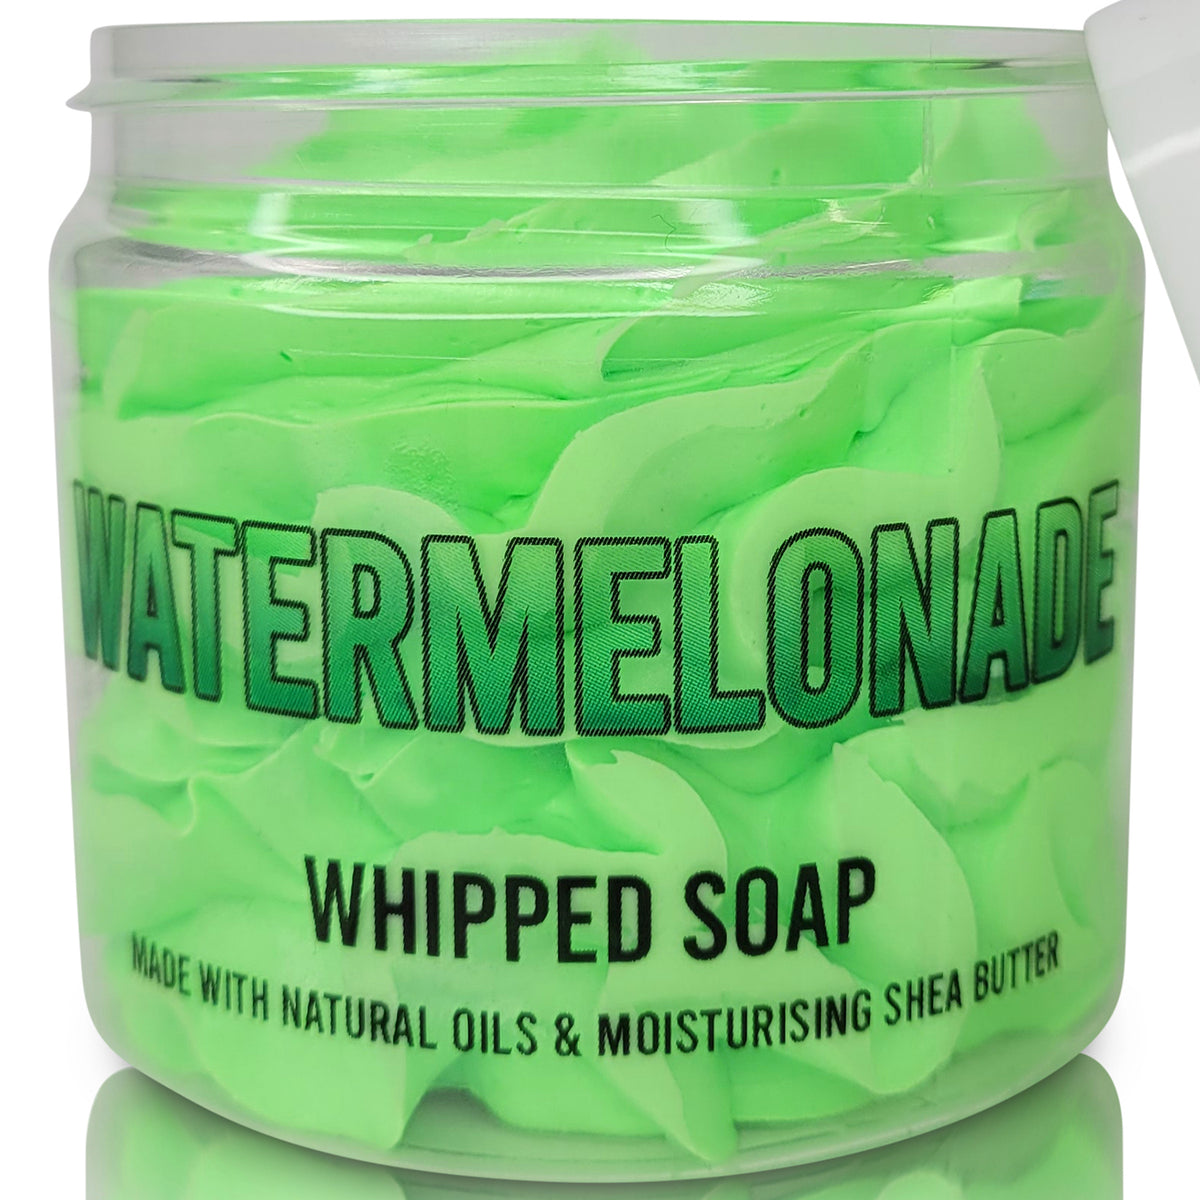 Watermelonade Whipped Soap